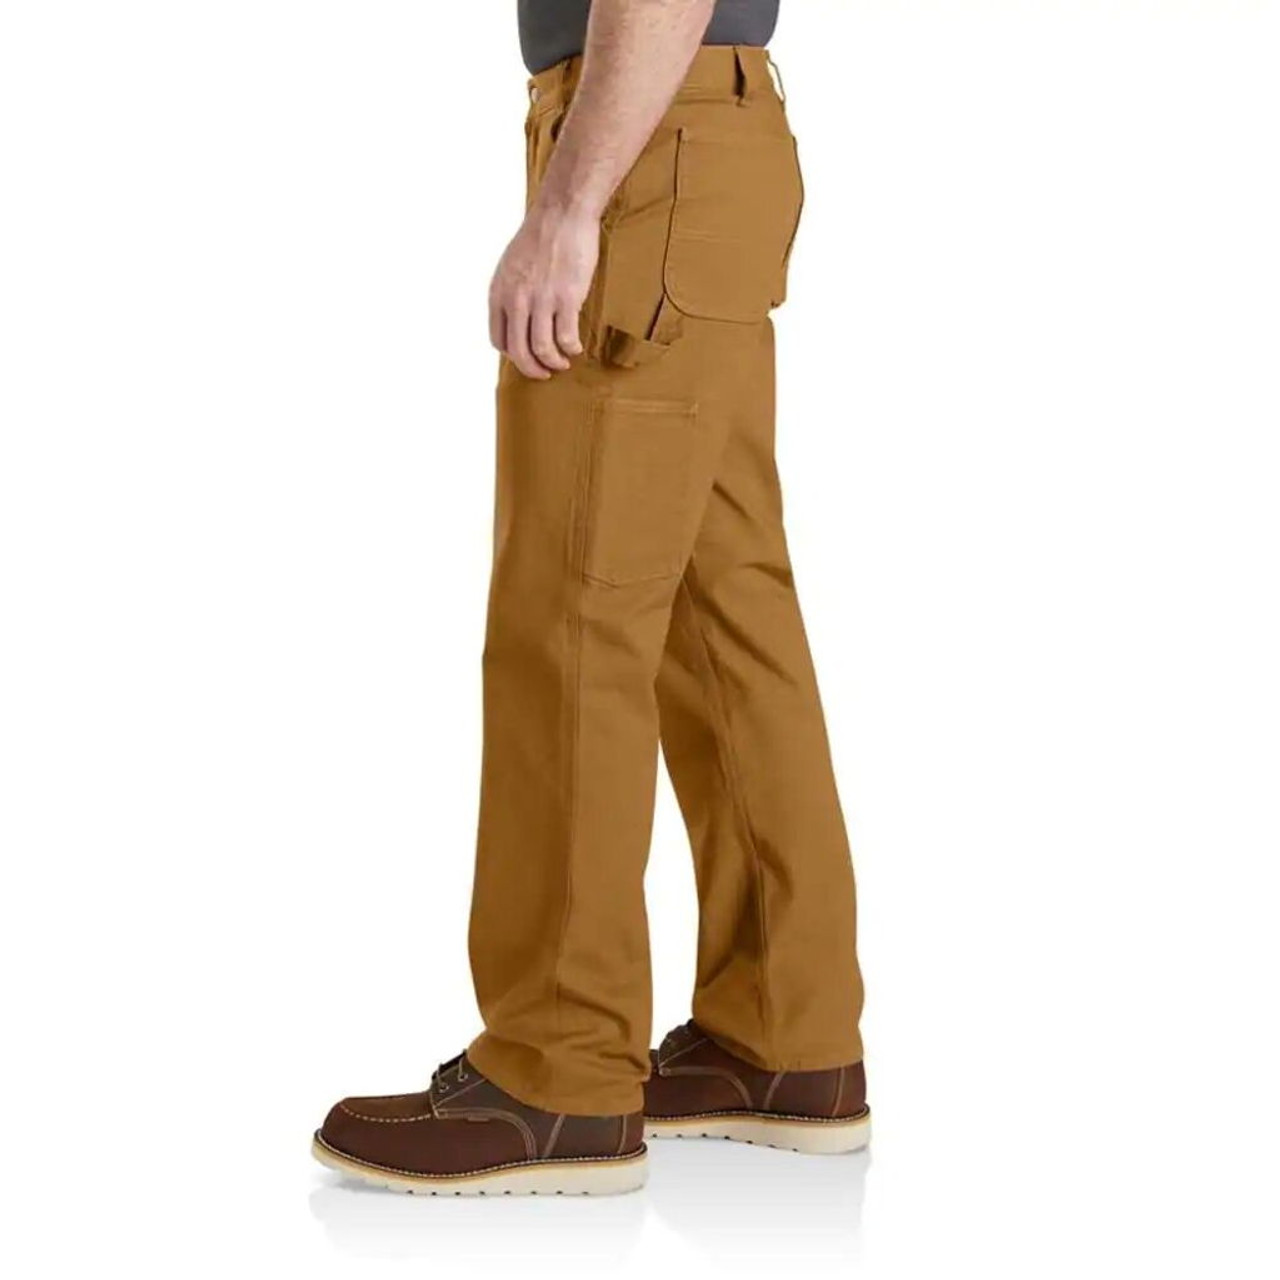 Rugged Flex Relaxed Fit Men's Heavyweight Work Pants — Ono Work & Safety